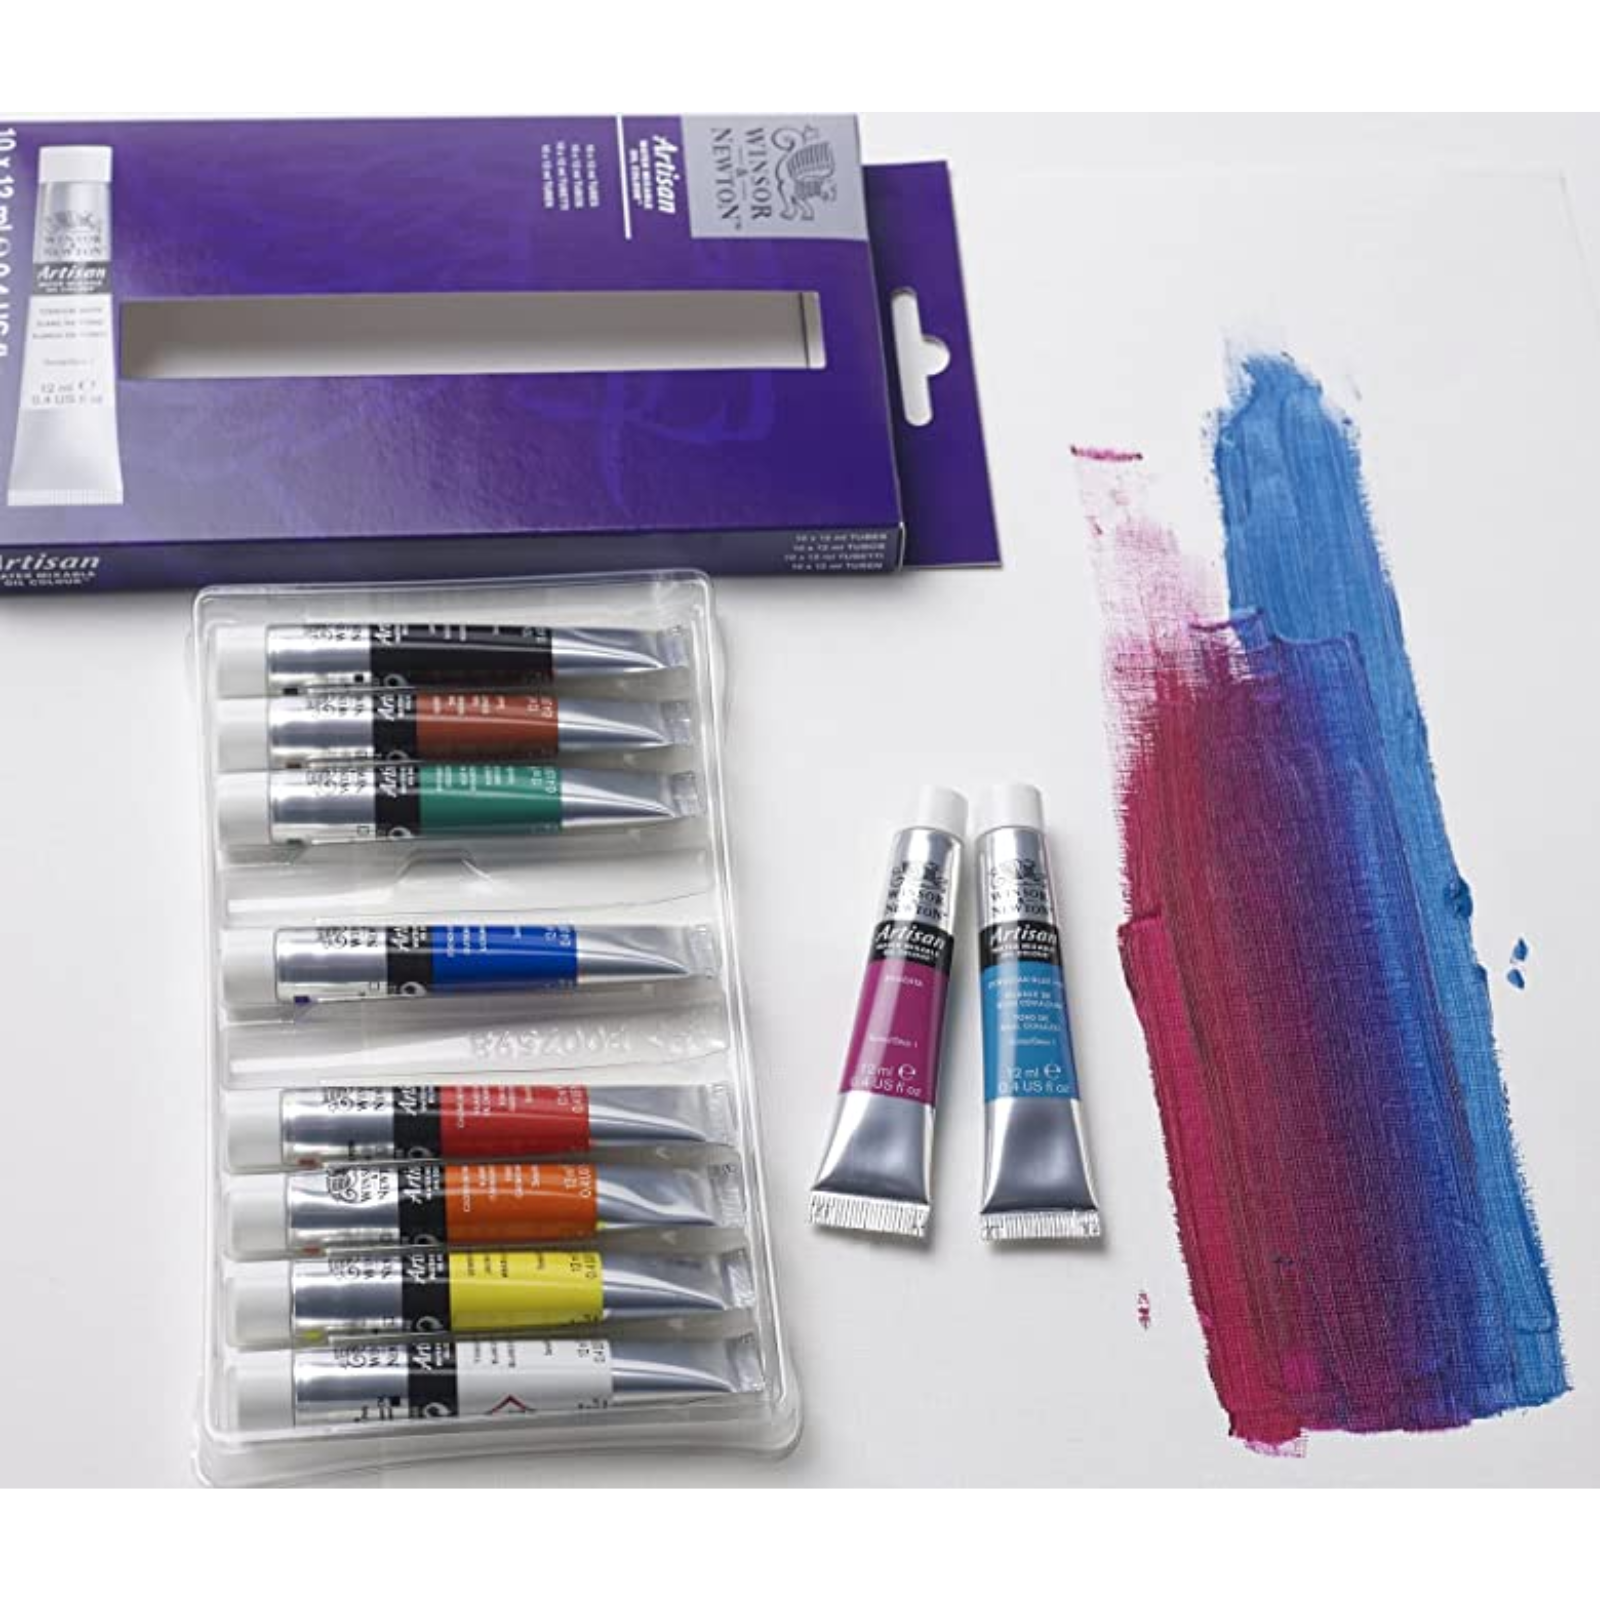 Winsor & Newton Artisan Water Mixable Oil Colour Set - you can use them in a variety of ways